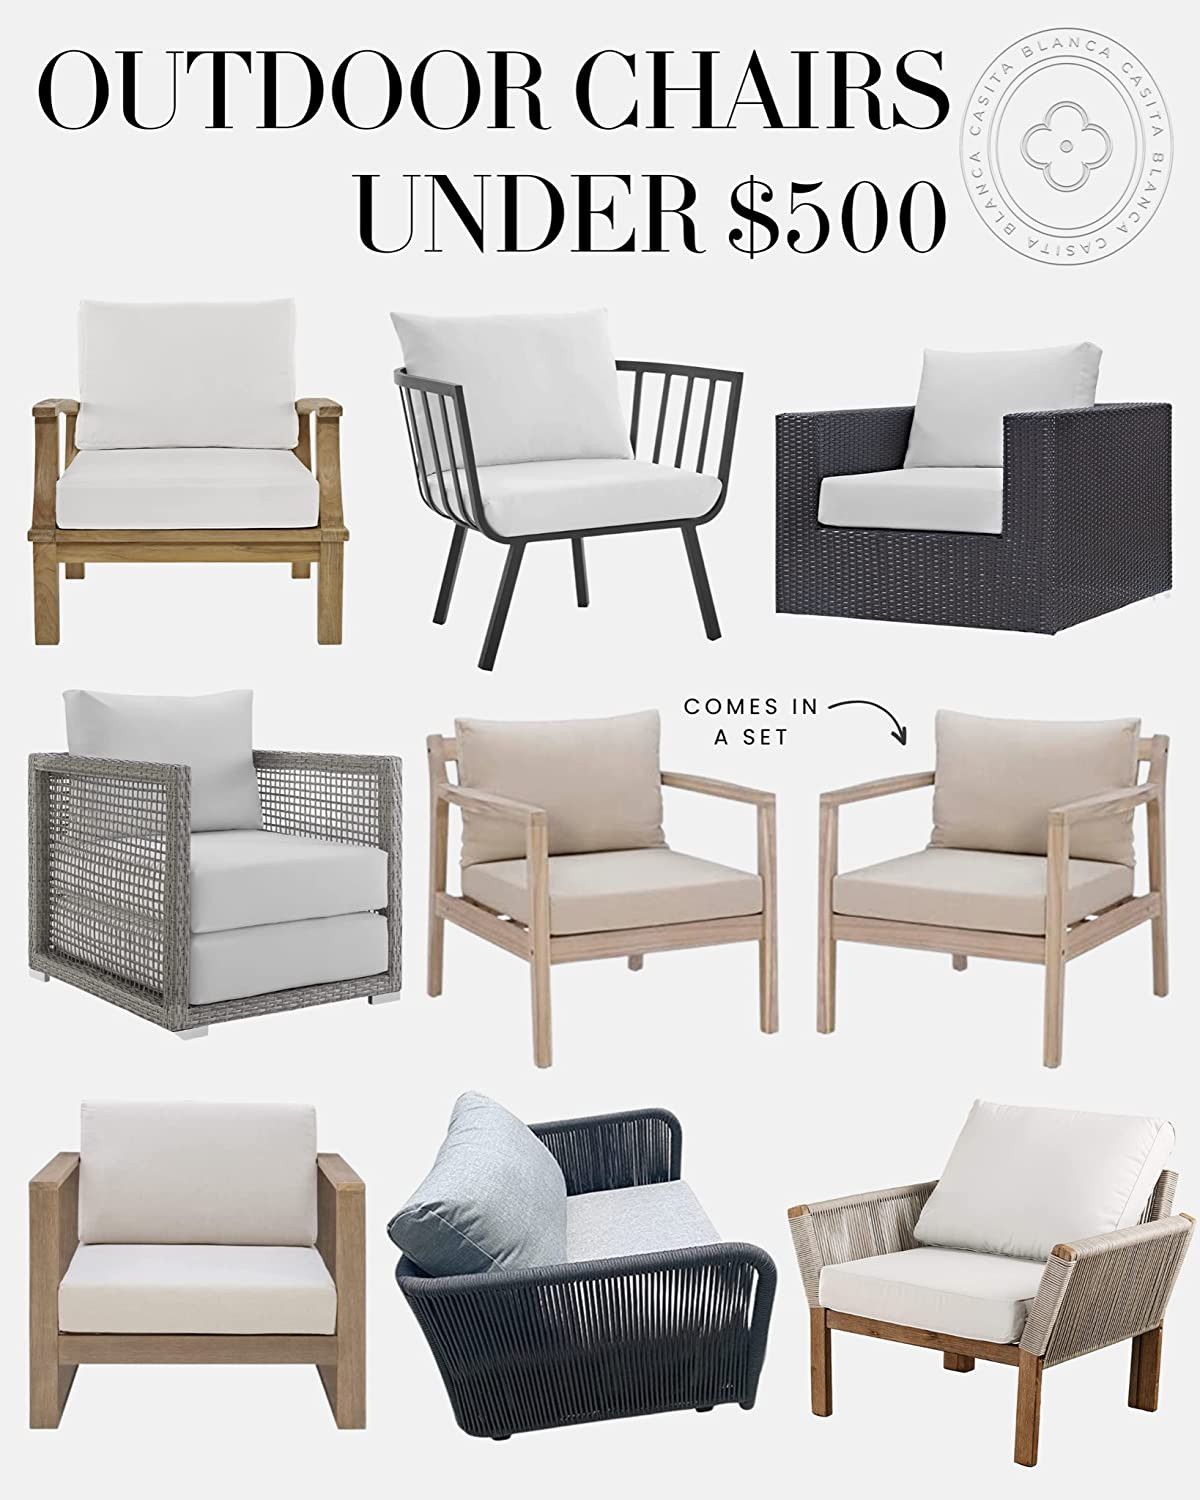 Outdoor chairs under $500 | Amazon (US)